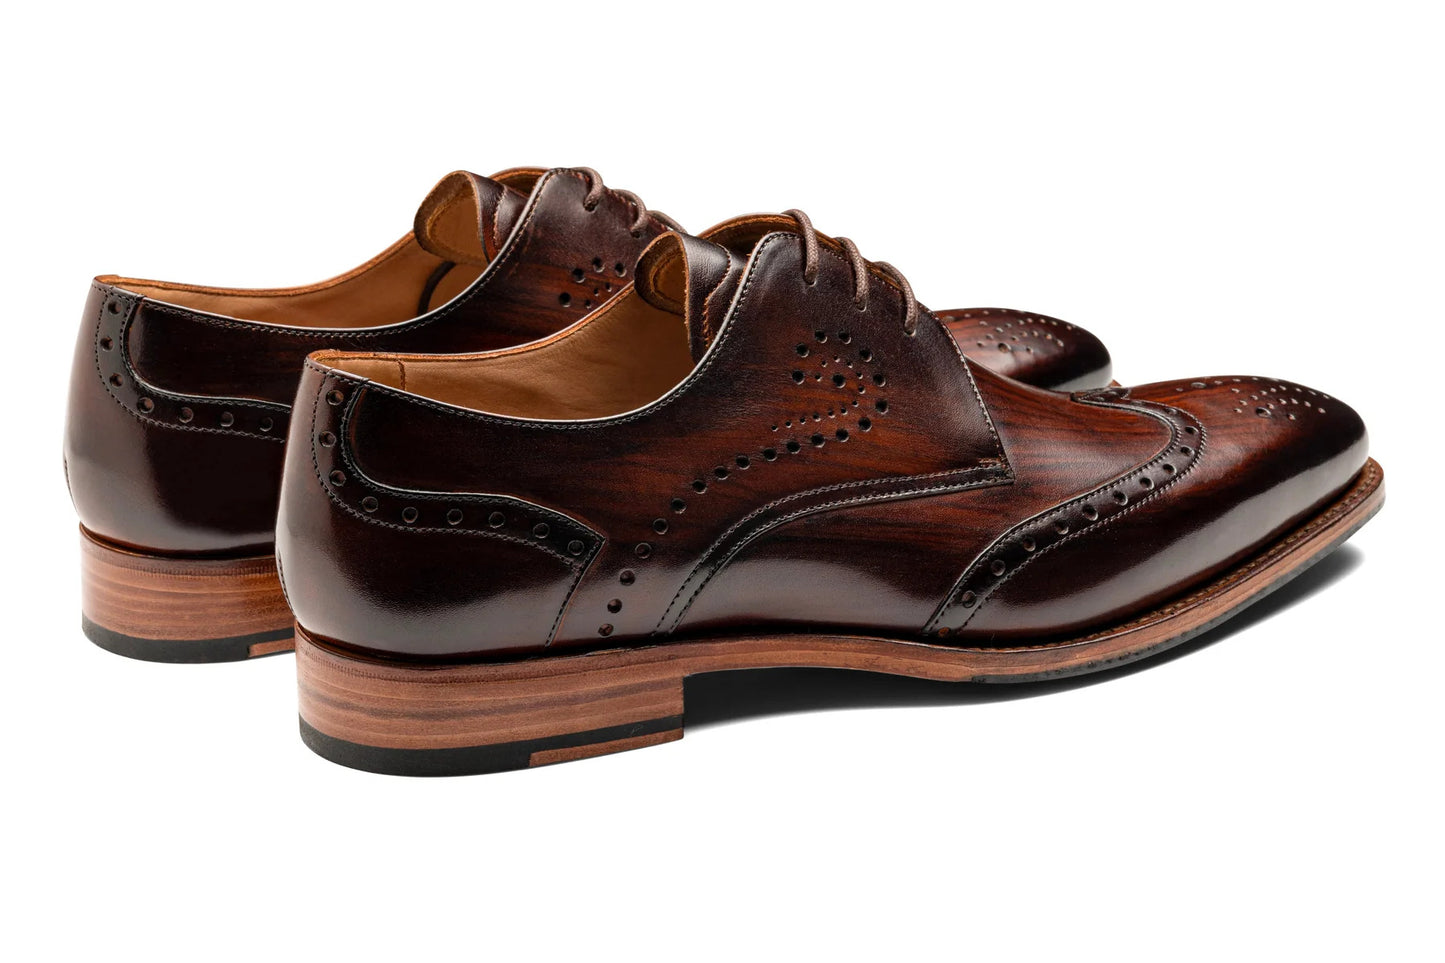 Barker 482126 George Brown Hand Patina Brogue Derby Shoes